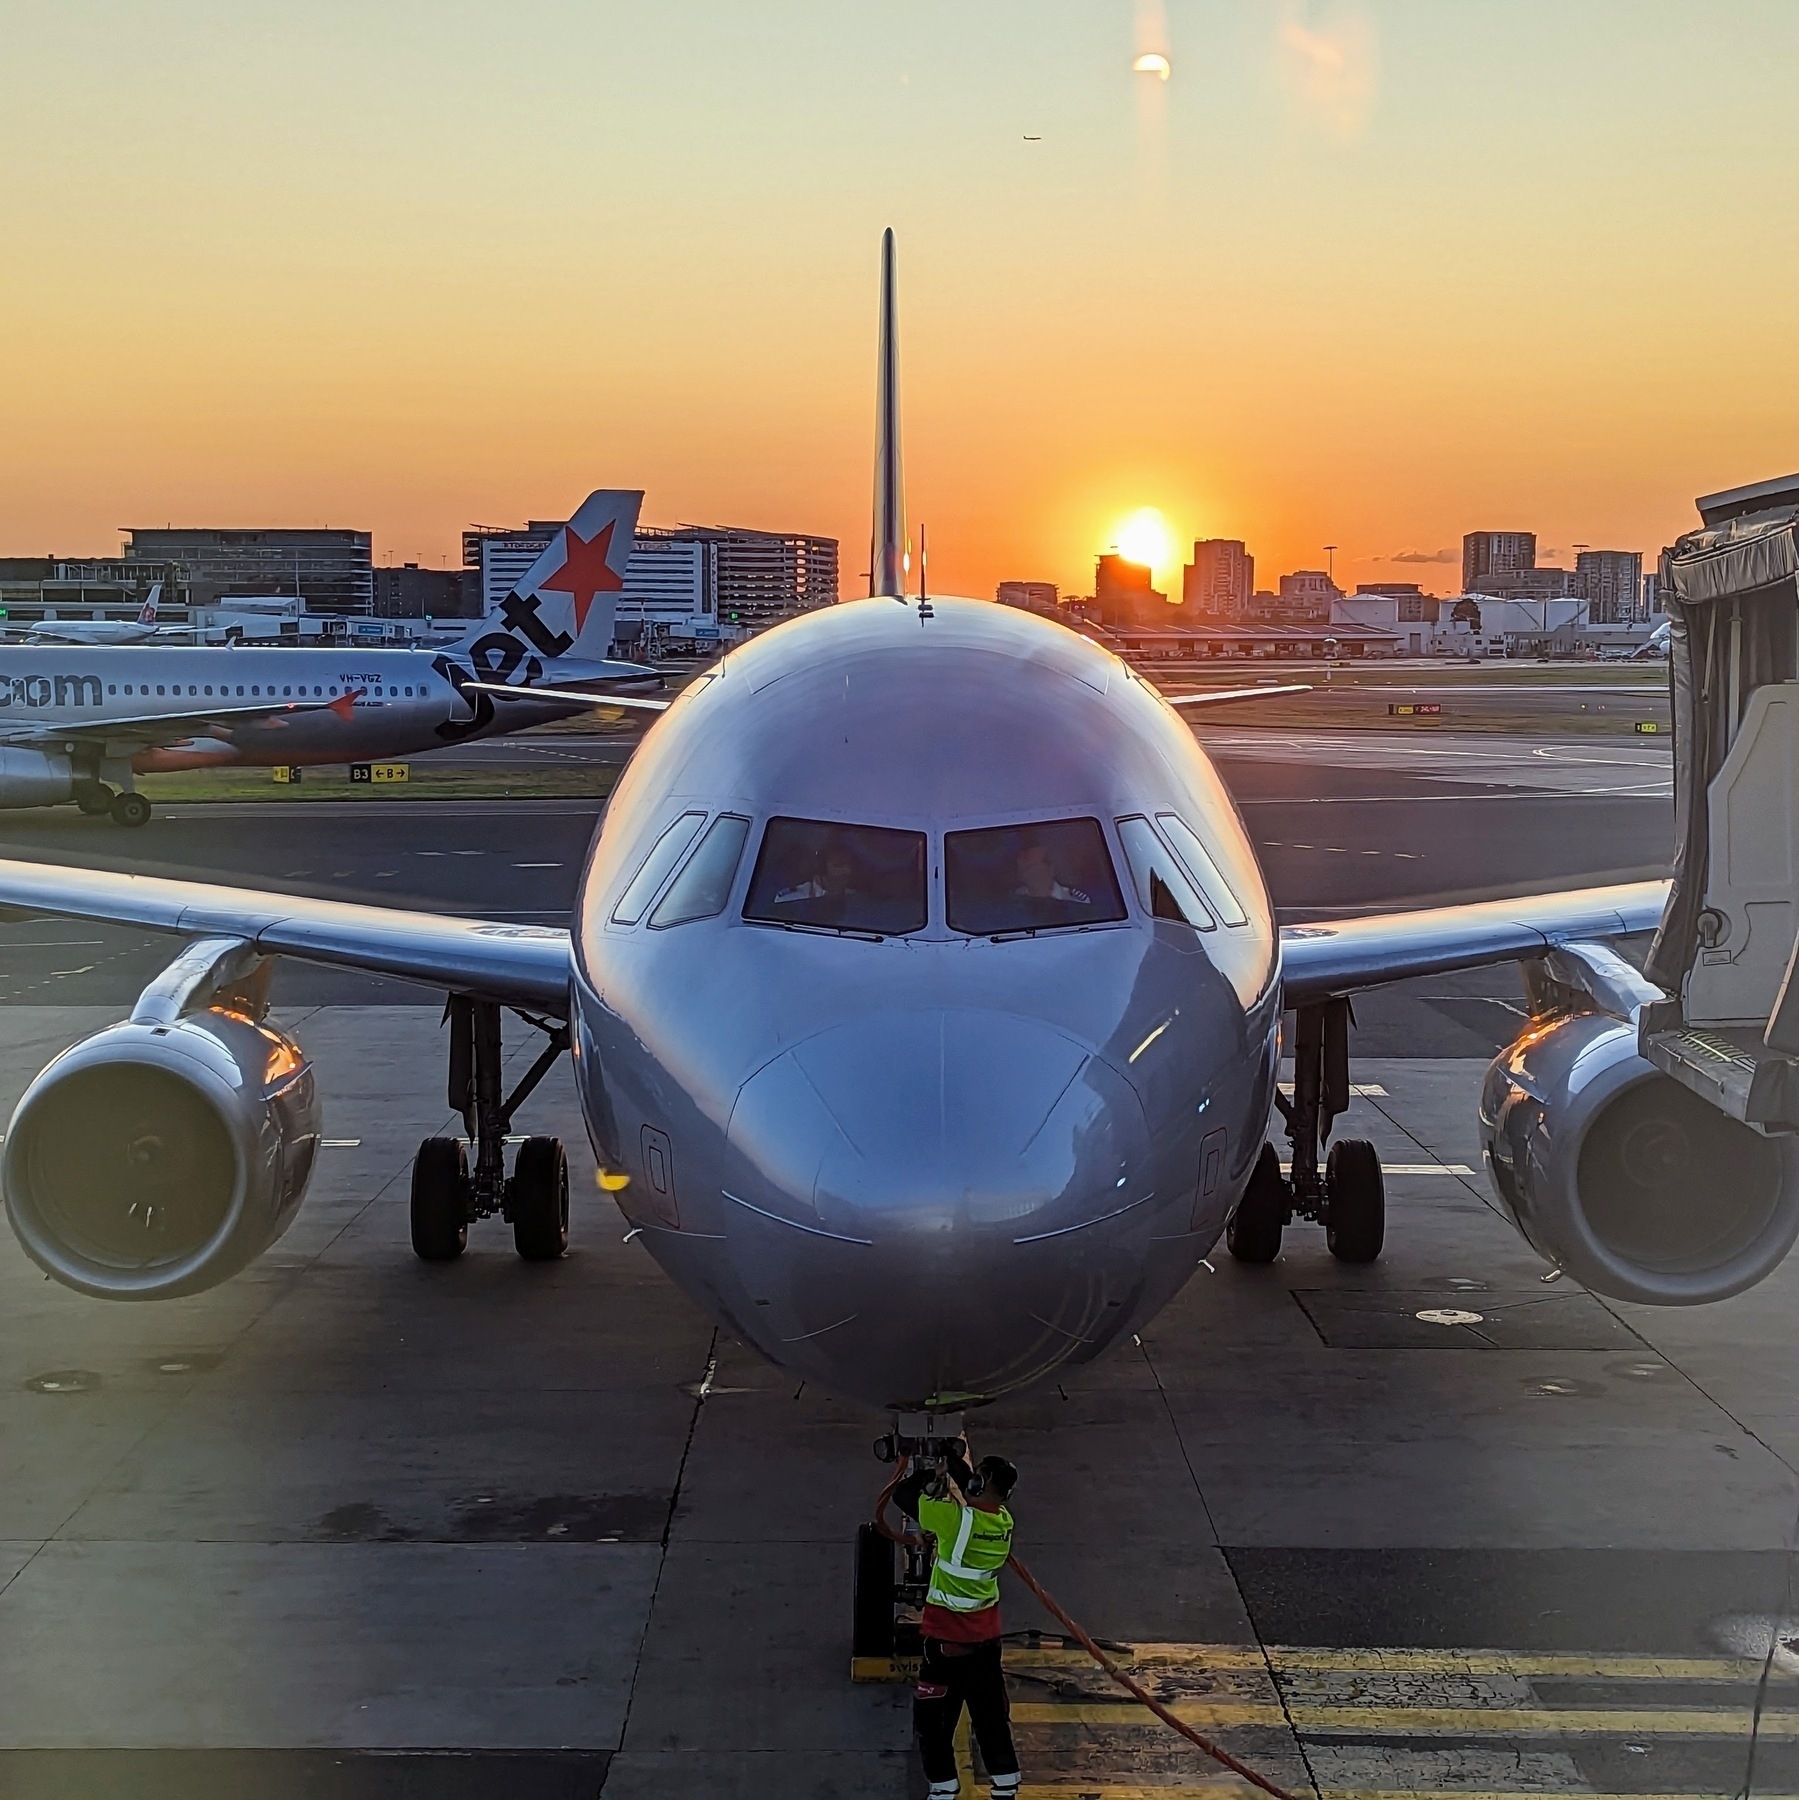 A photograph of the nose of a jet plane parked at an airport gate. In the background, the sun sets in an orange sky behind city apartment blocks.